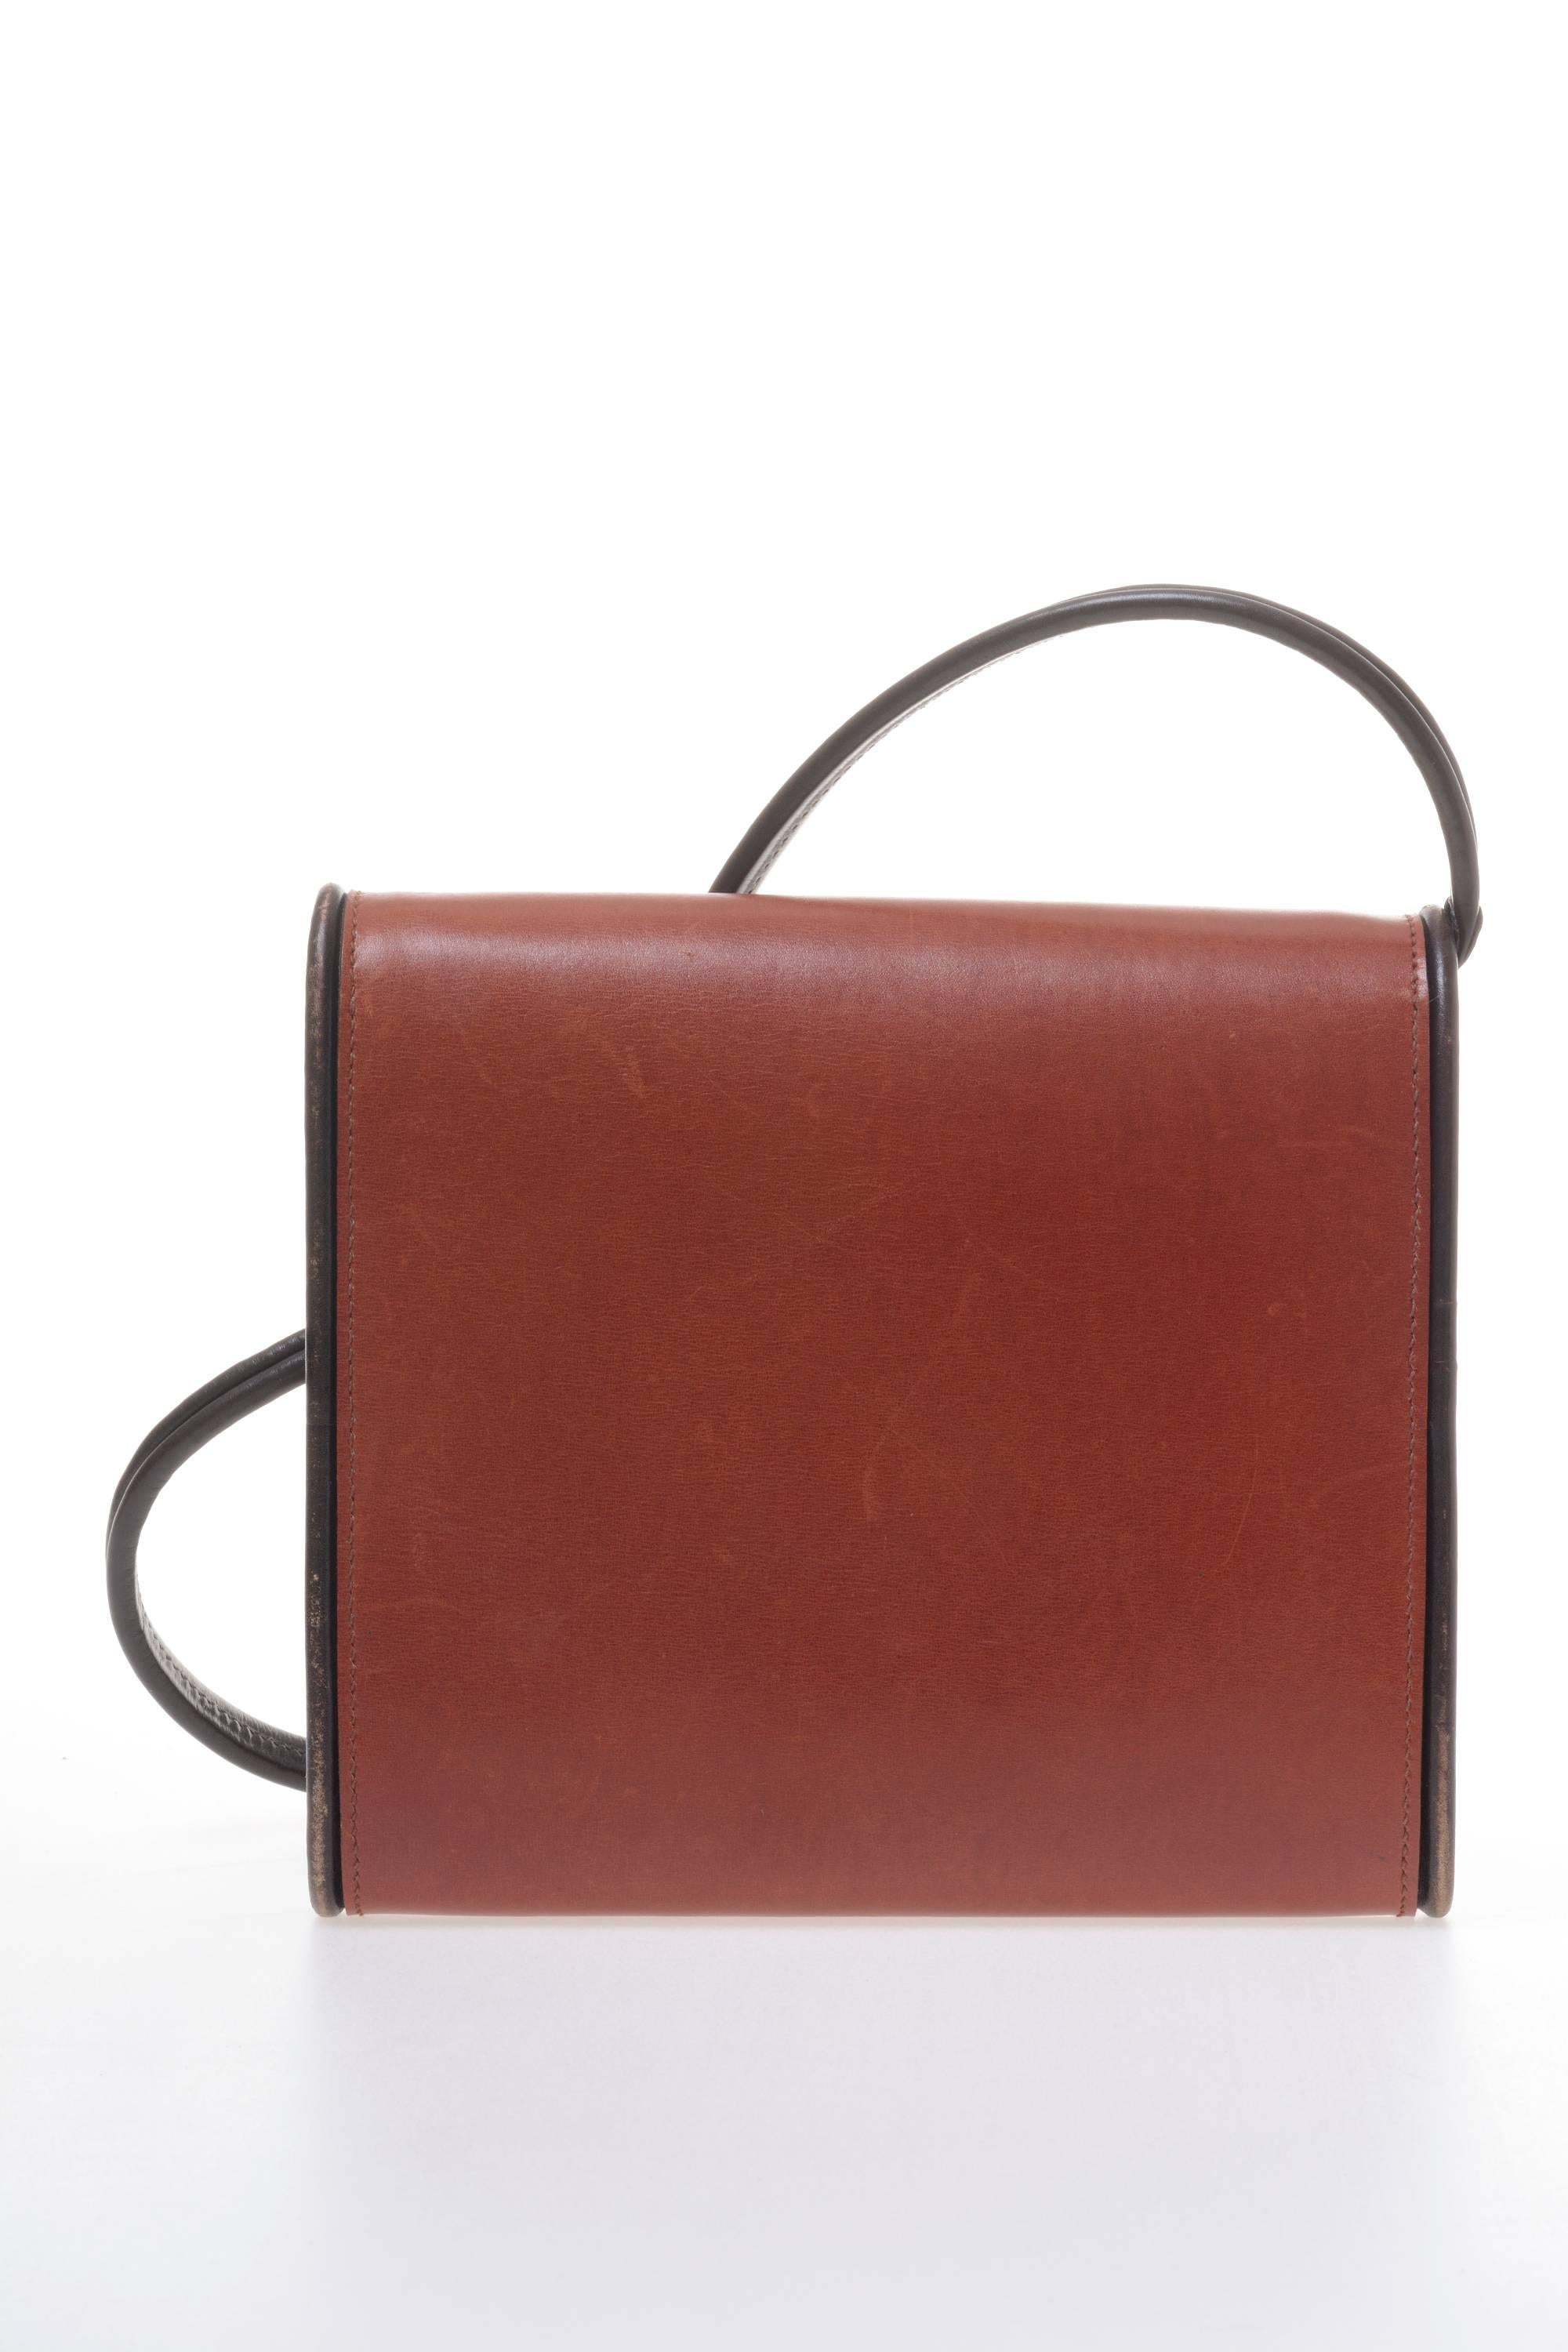 This lovely 1970s envelope clutch bag by HERMES has been made by hand in Italy, made of brown leather and fully lined with nude leather, the hems have a dark brown colour with decorative sewing, a shoulder strap that could be removed and a Button